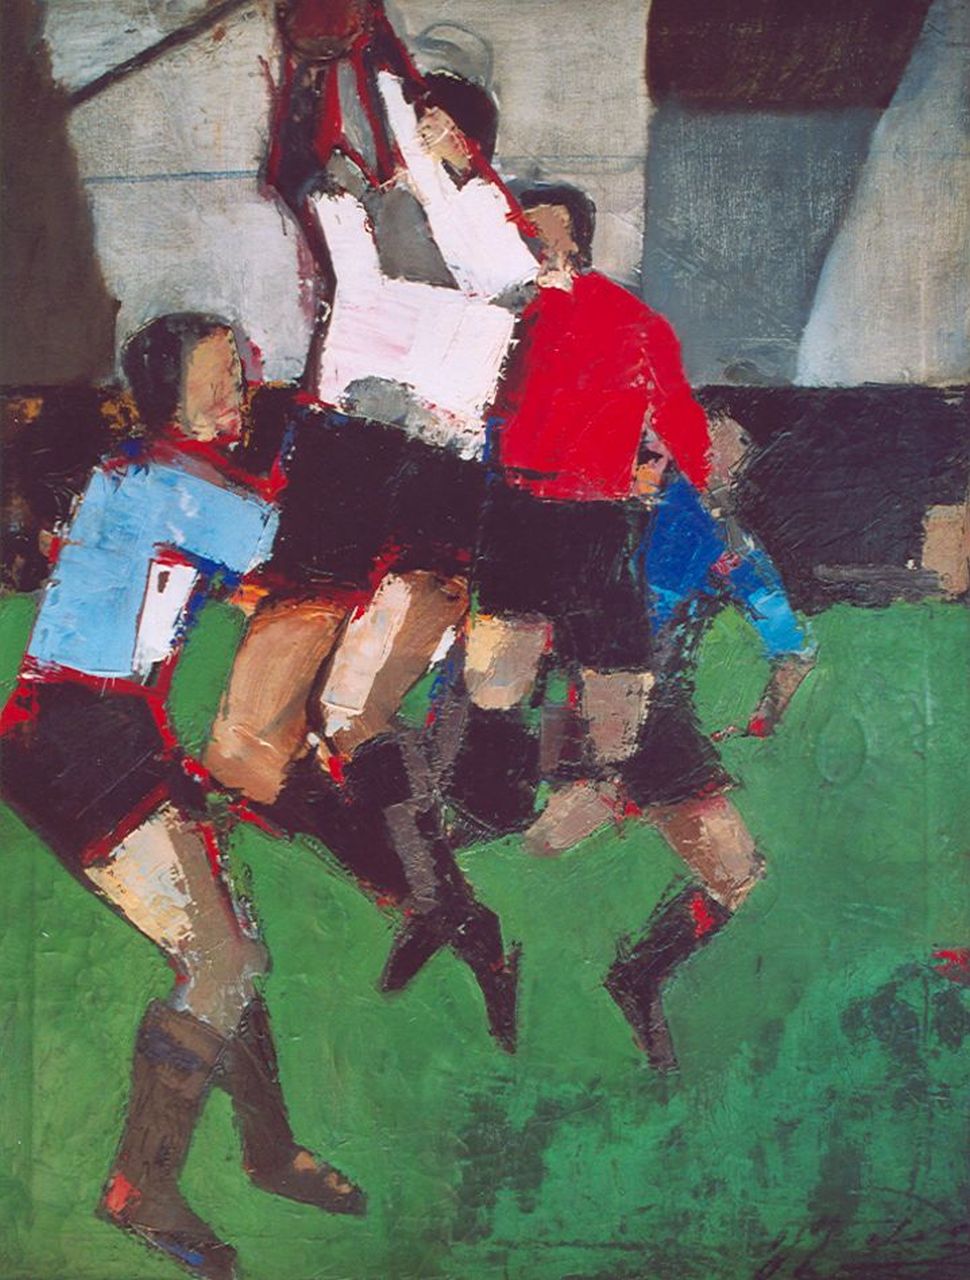 Onbekend   | Onbekend, The keeper saves the ball, oil on canvas 100.3 x 75.8 cm, te dateren ca. 1950